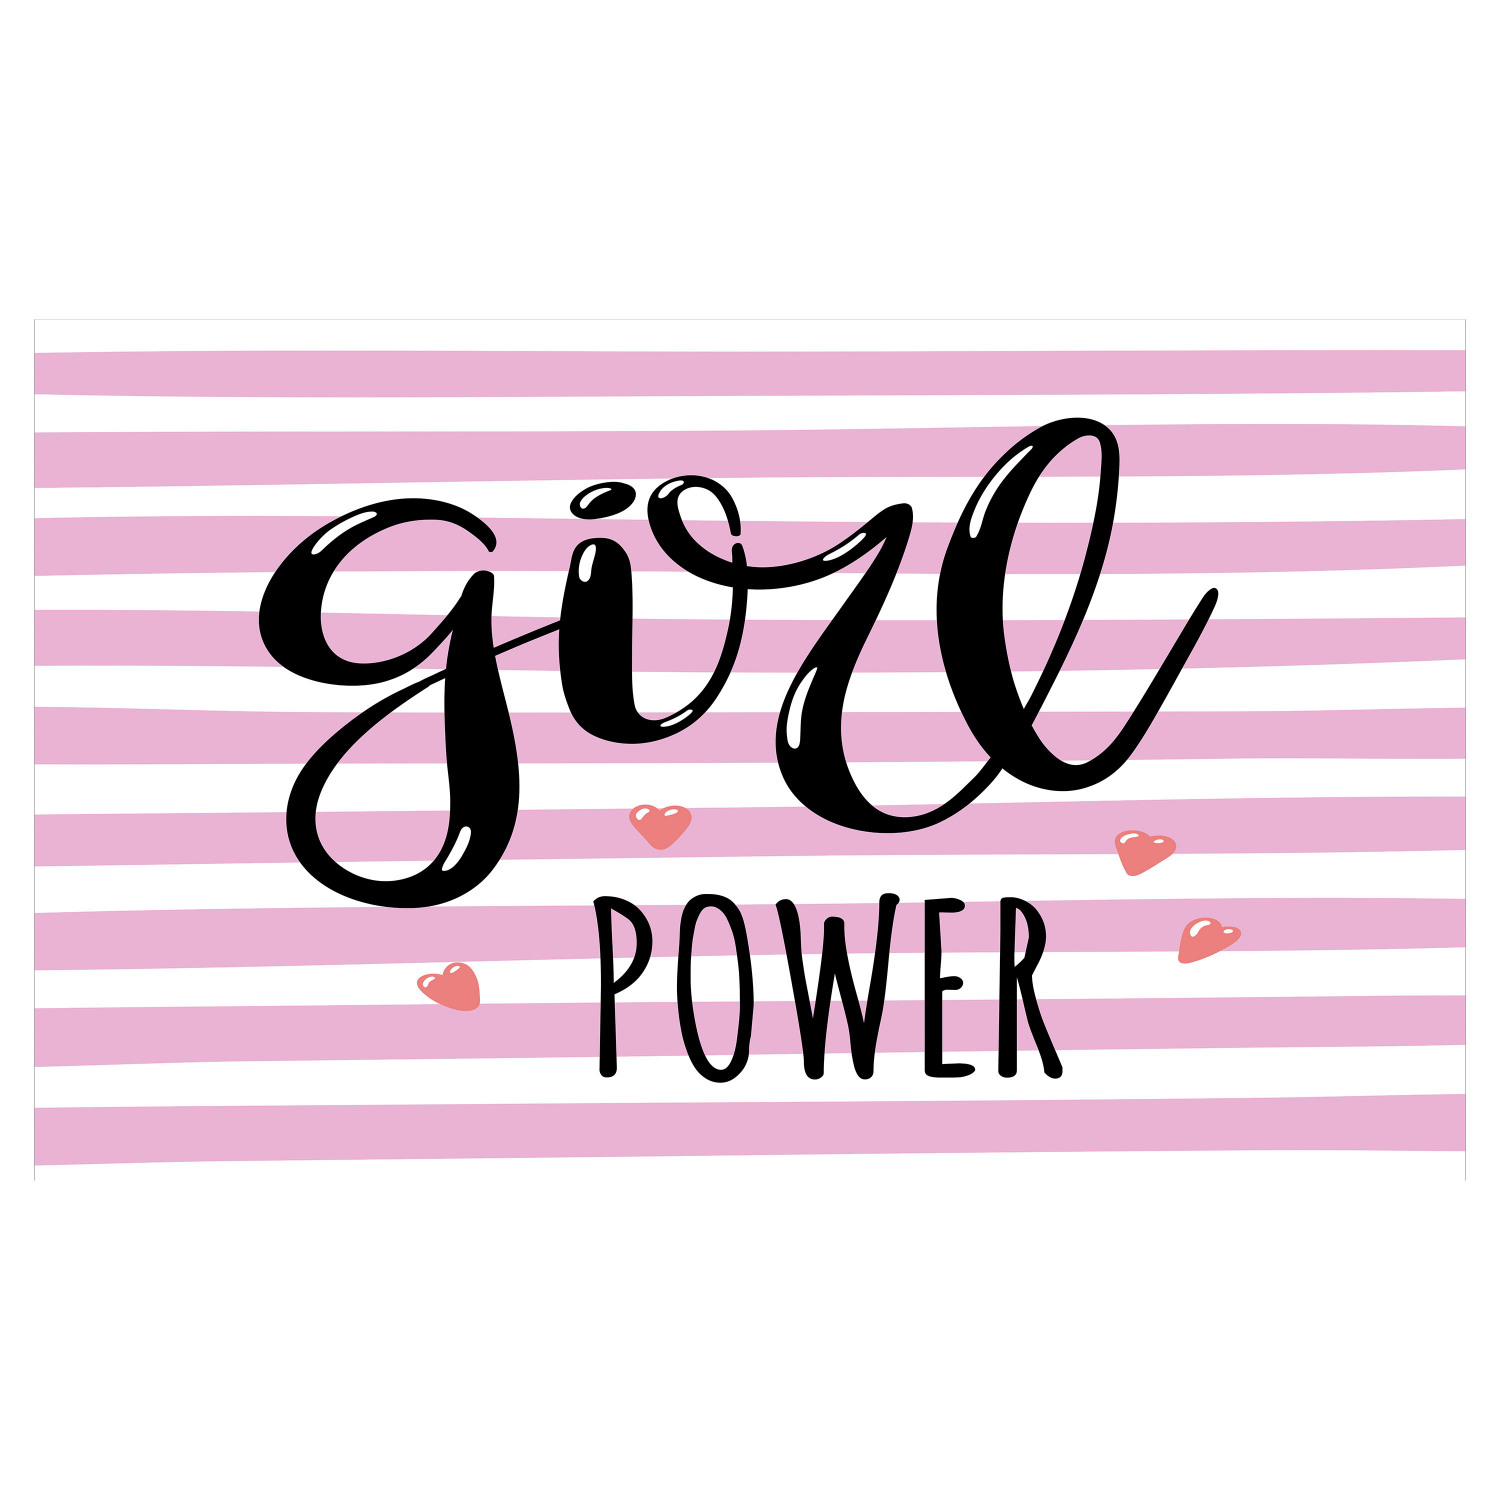 Lettering Ceramic Toothbrush Holder, Girl Power Striped Hearts Teen Motivation Feminism Strong Words, Decorative Versatile Countertop for Bathroom, 4.5" X 2.7", Pale Pink Charcoal Grey - image 4 of 4